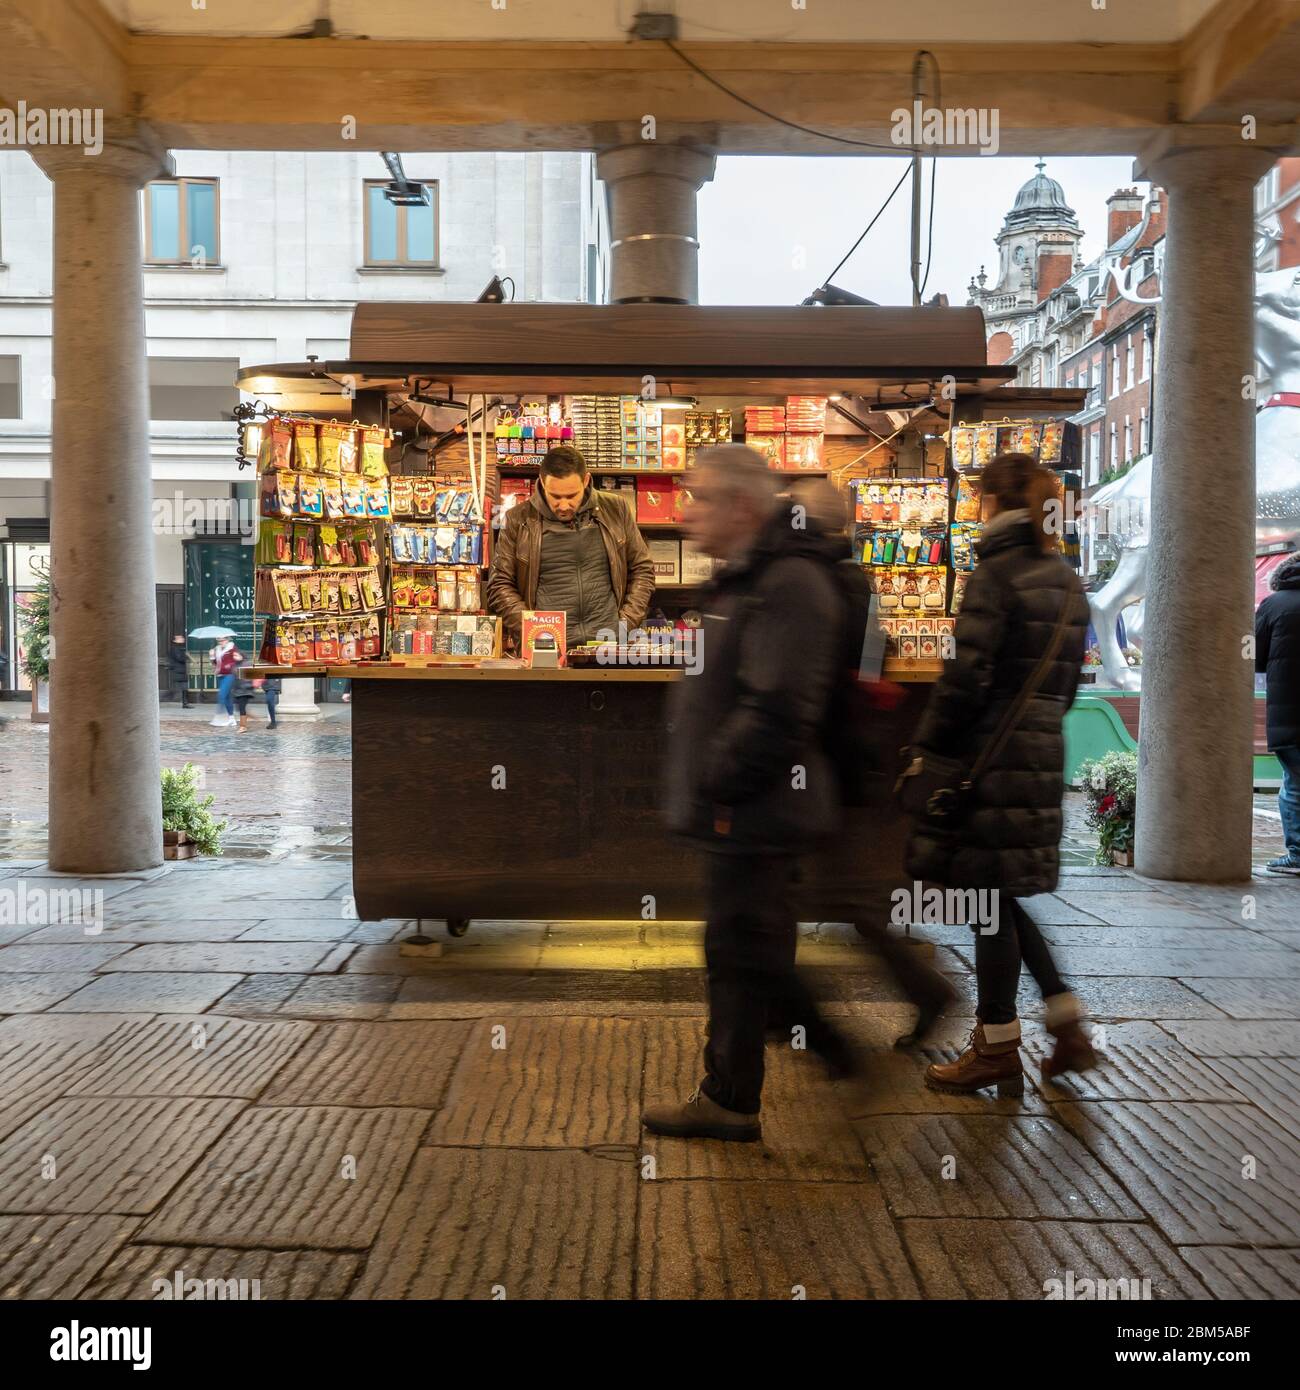 Covent Garden street trader. Candid shoppers walking by a brightly lit market stall holder in the heart of London's West End tourist district. Stock Photo